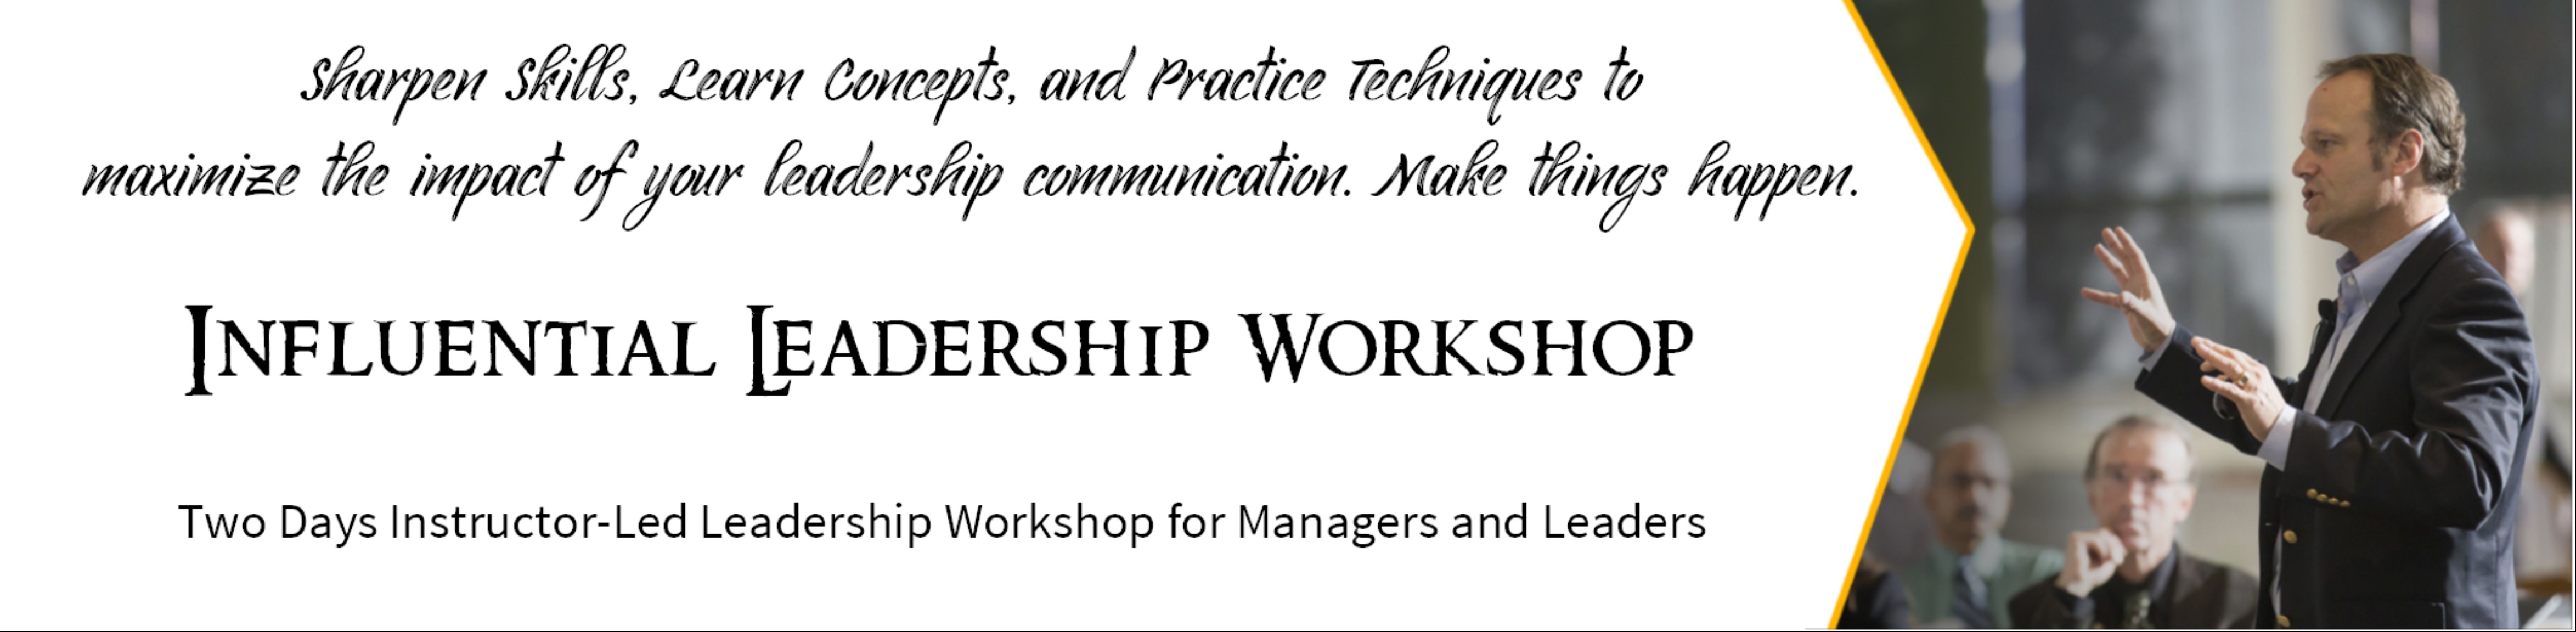 Influential Leadership - Workshop for Managers and Leaders @ Delhi NCR, South West Delhi, Delhi, India